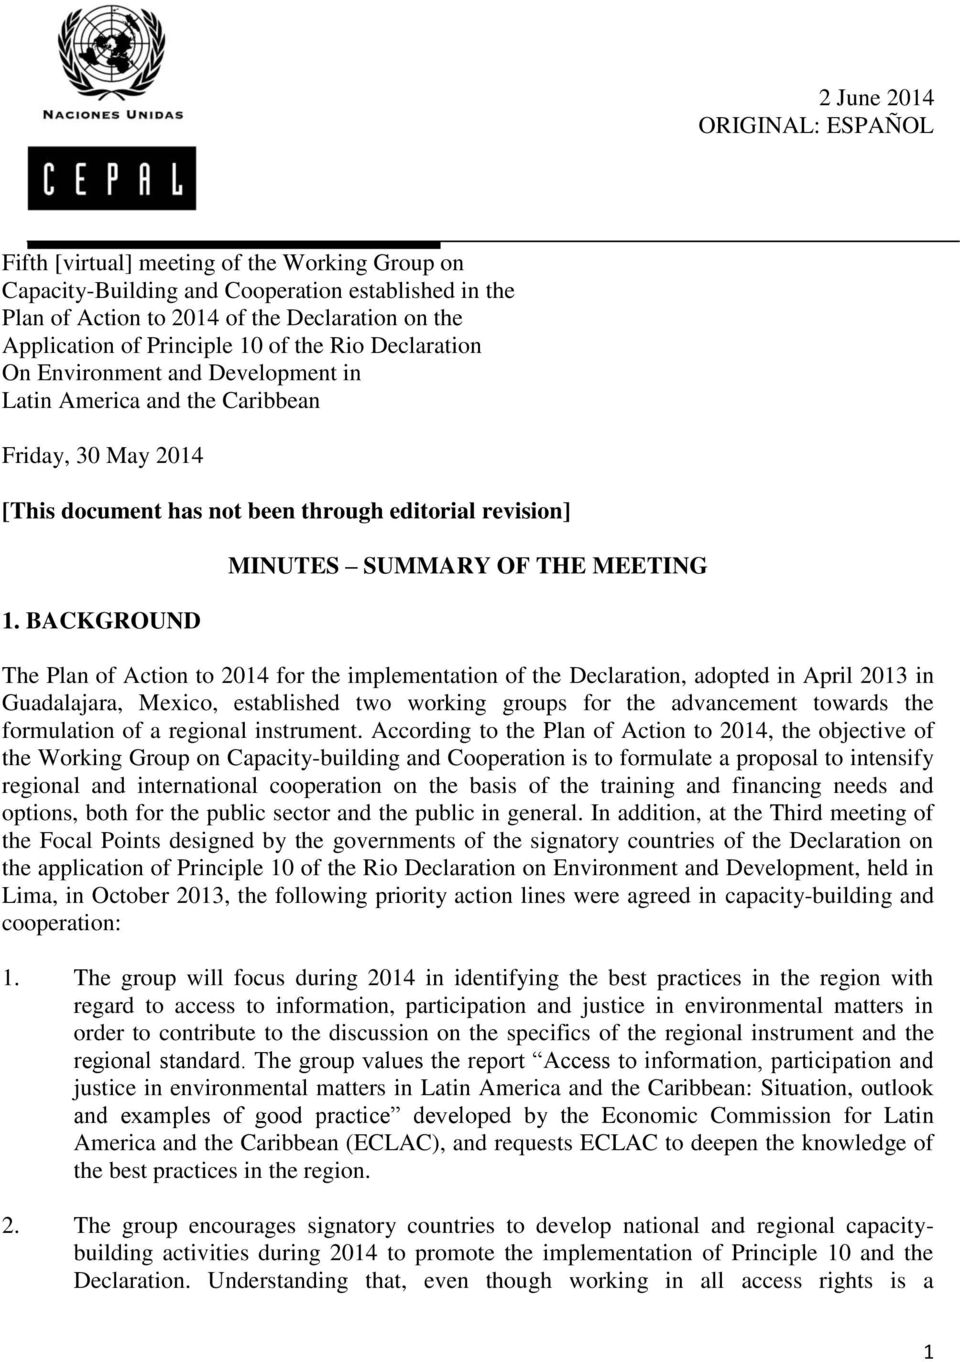 BACKGROUND MINUTES SUMMARY OF THE MEETING The Plan of Action to 2014 for the implementation of the Declaration, adopted in April 2013 in Guadalajara, Mexico, established two working groups for the